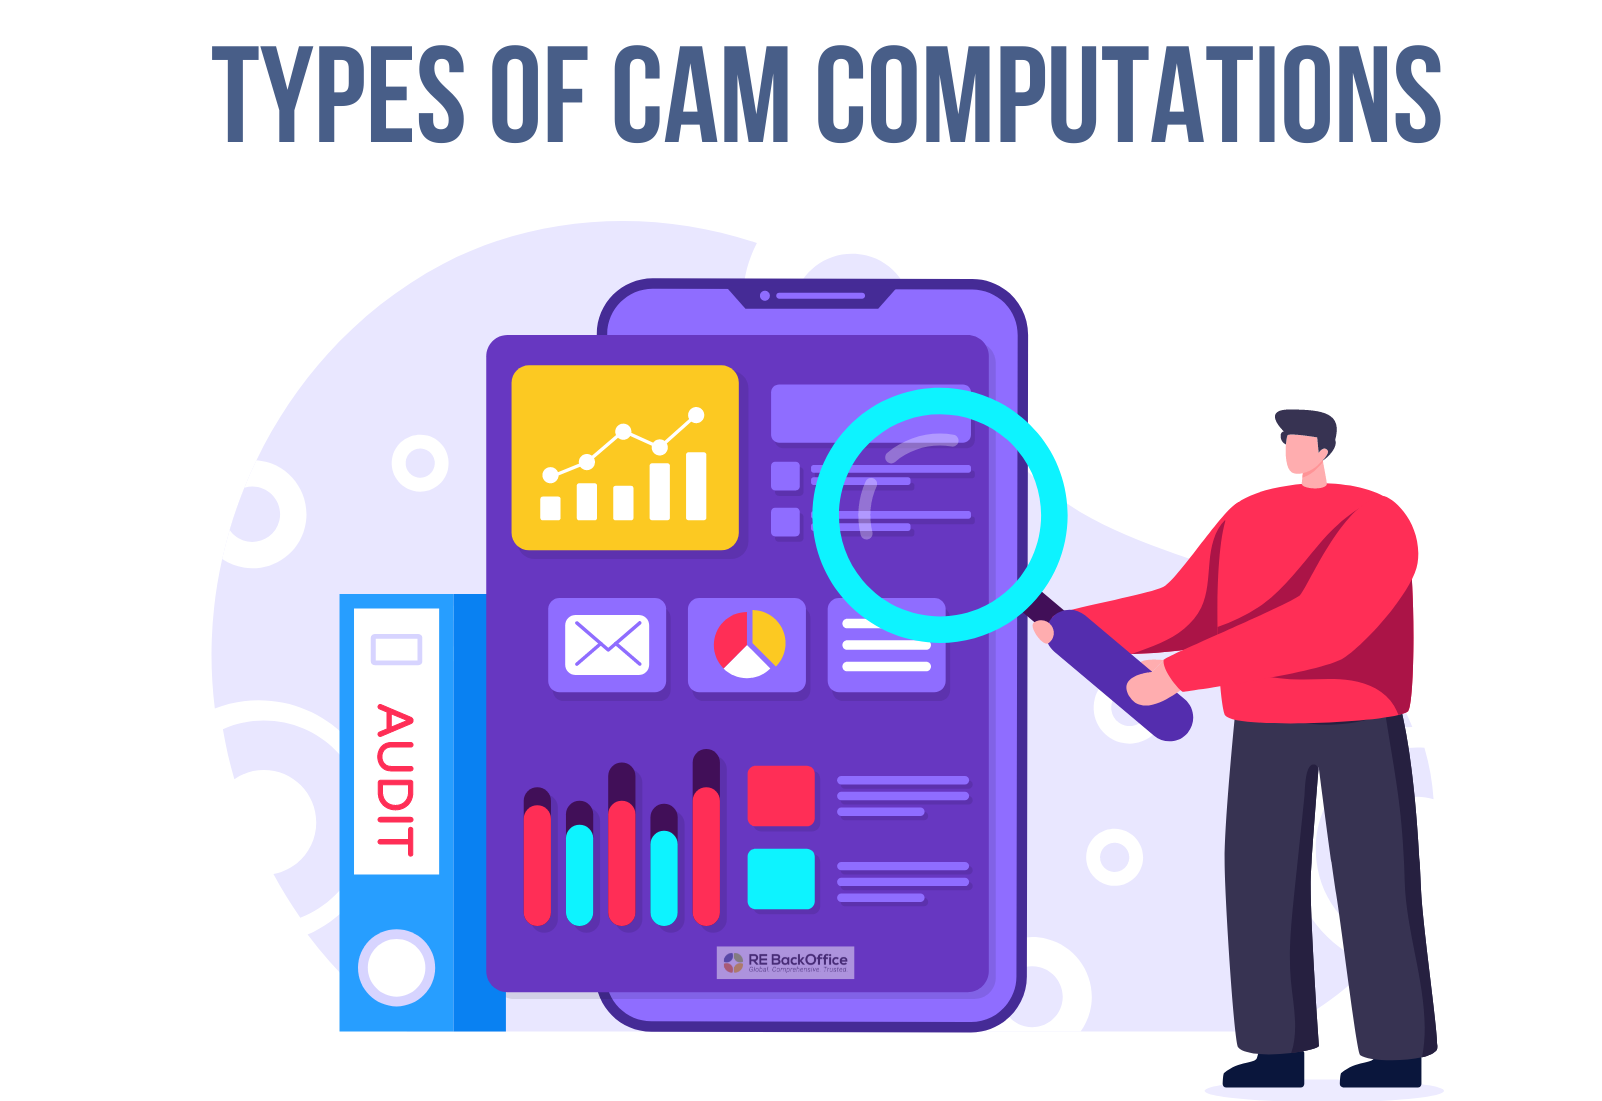 Lease Administration post: Understanding different types of CAM Computations